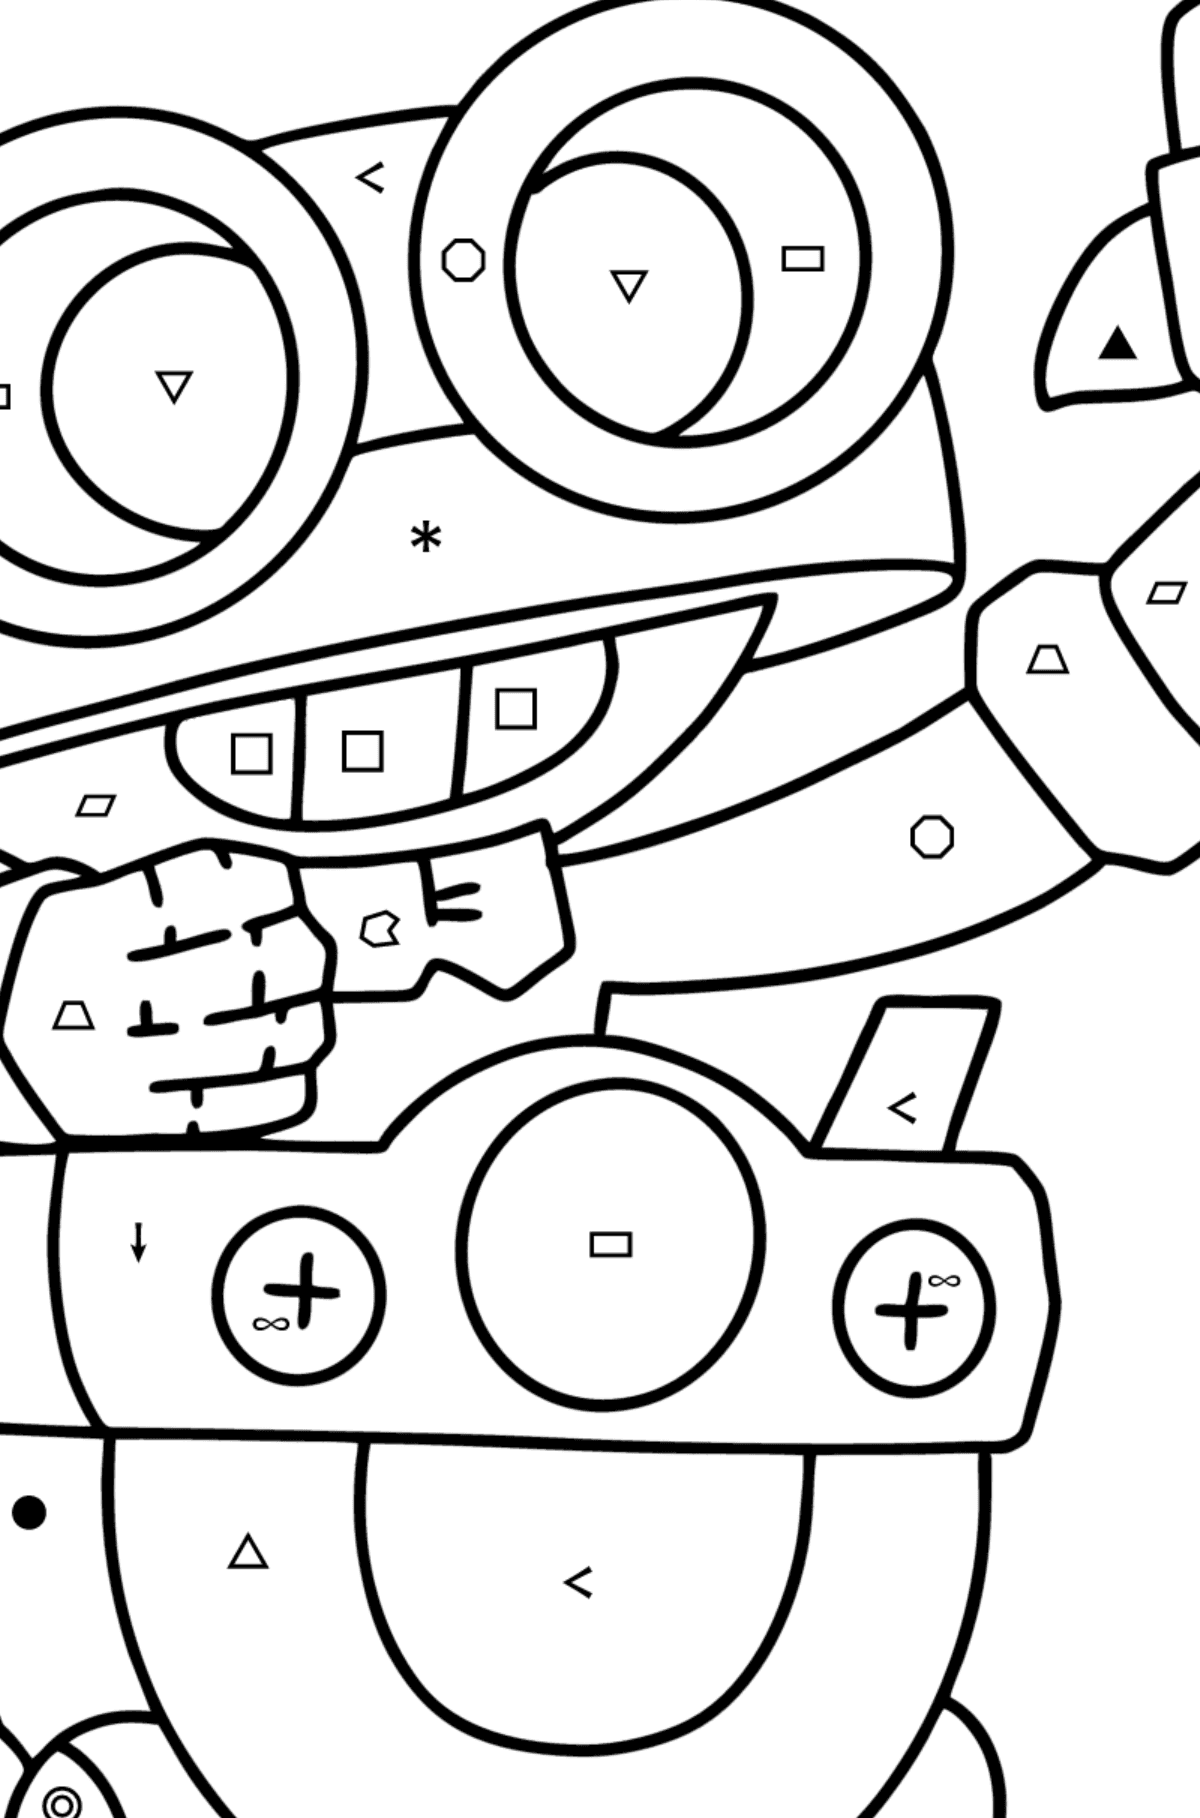 Brawl Stars Carl coloring page - Coloring by Symbols and Geometric Shapes for Kids